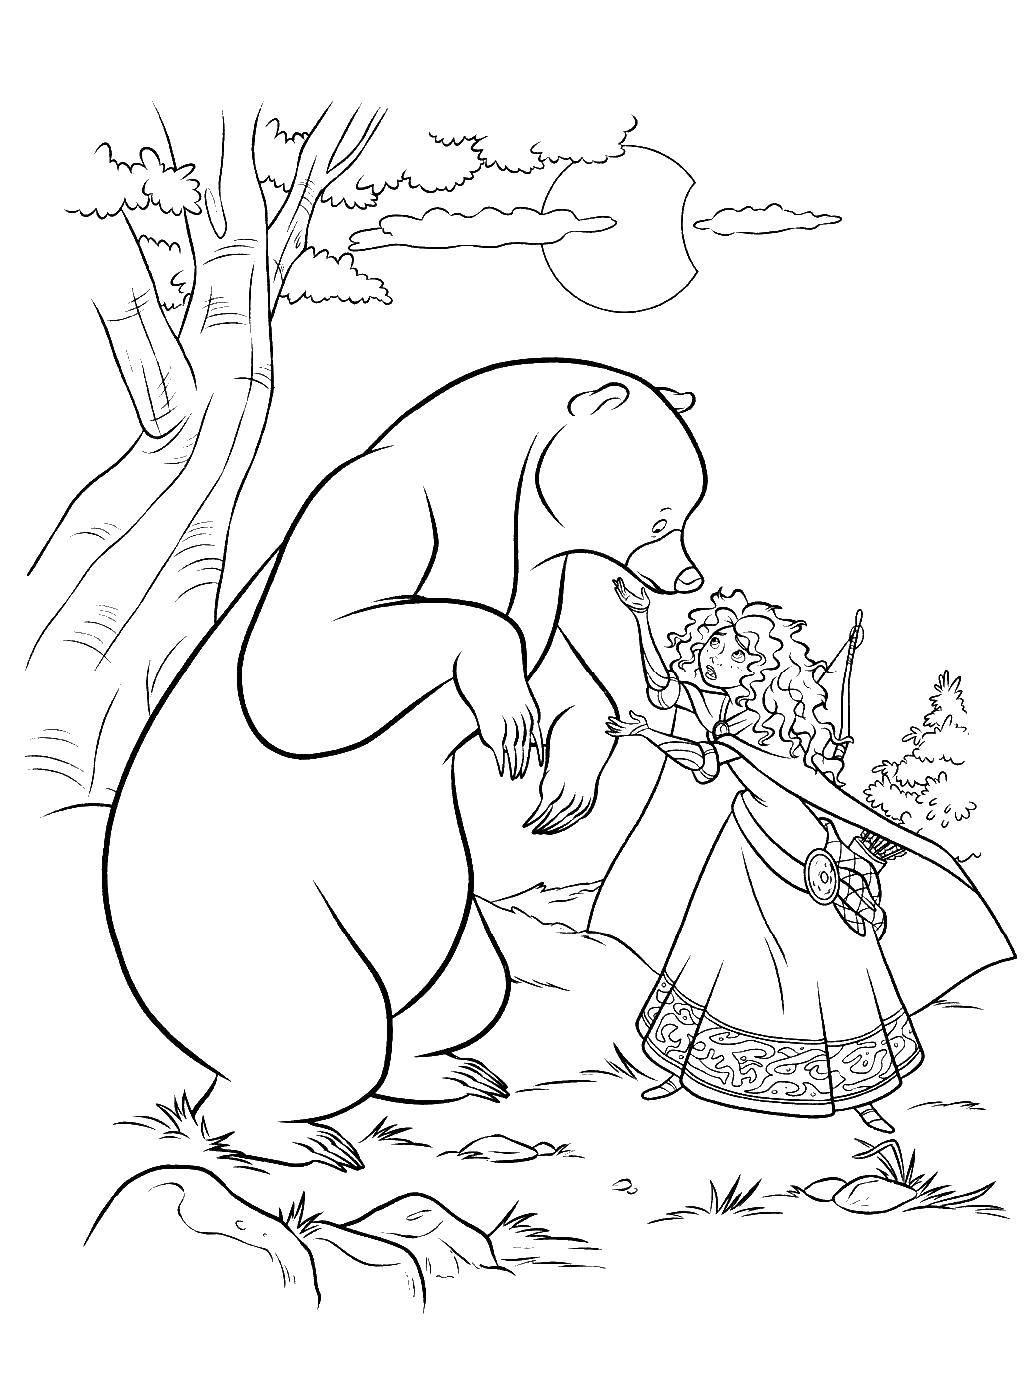 Coloring Bear and Princess. Category brave heart. Tags:  Brave heart, cartoon, Princess, bear.